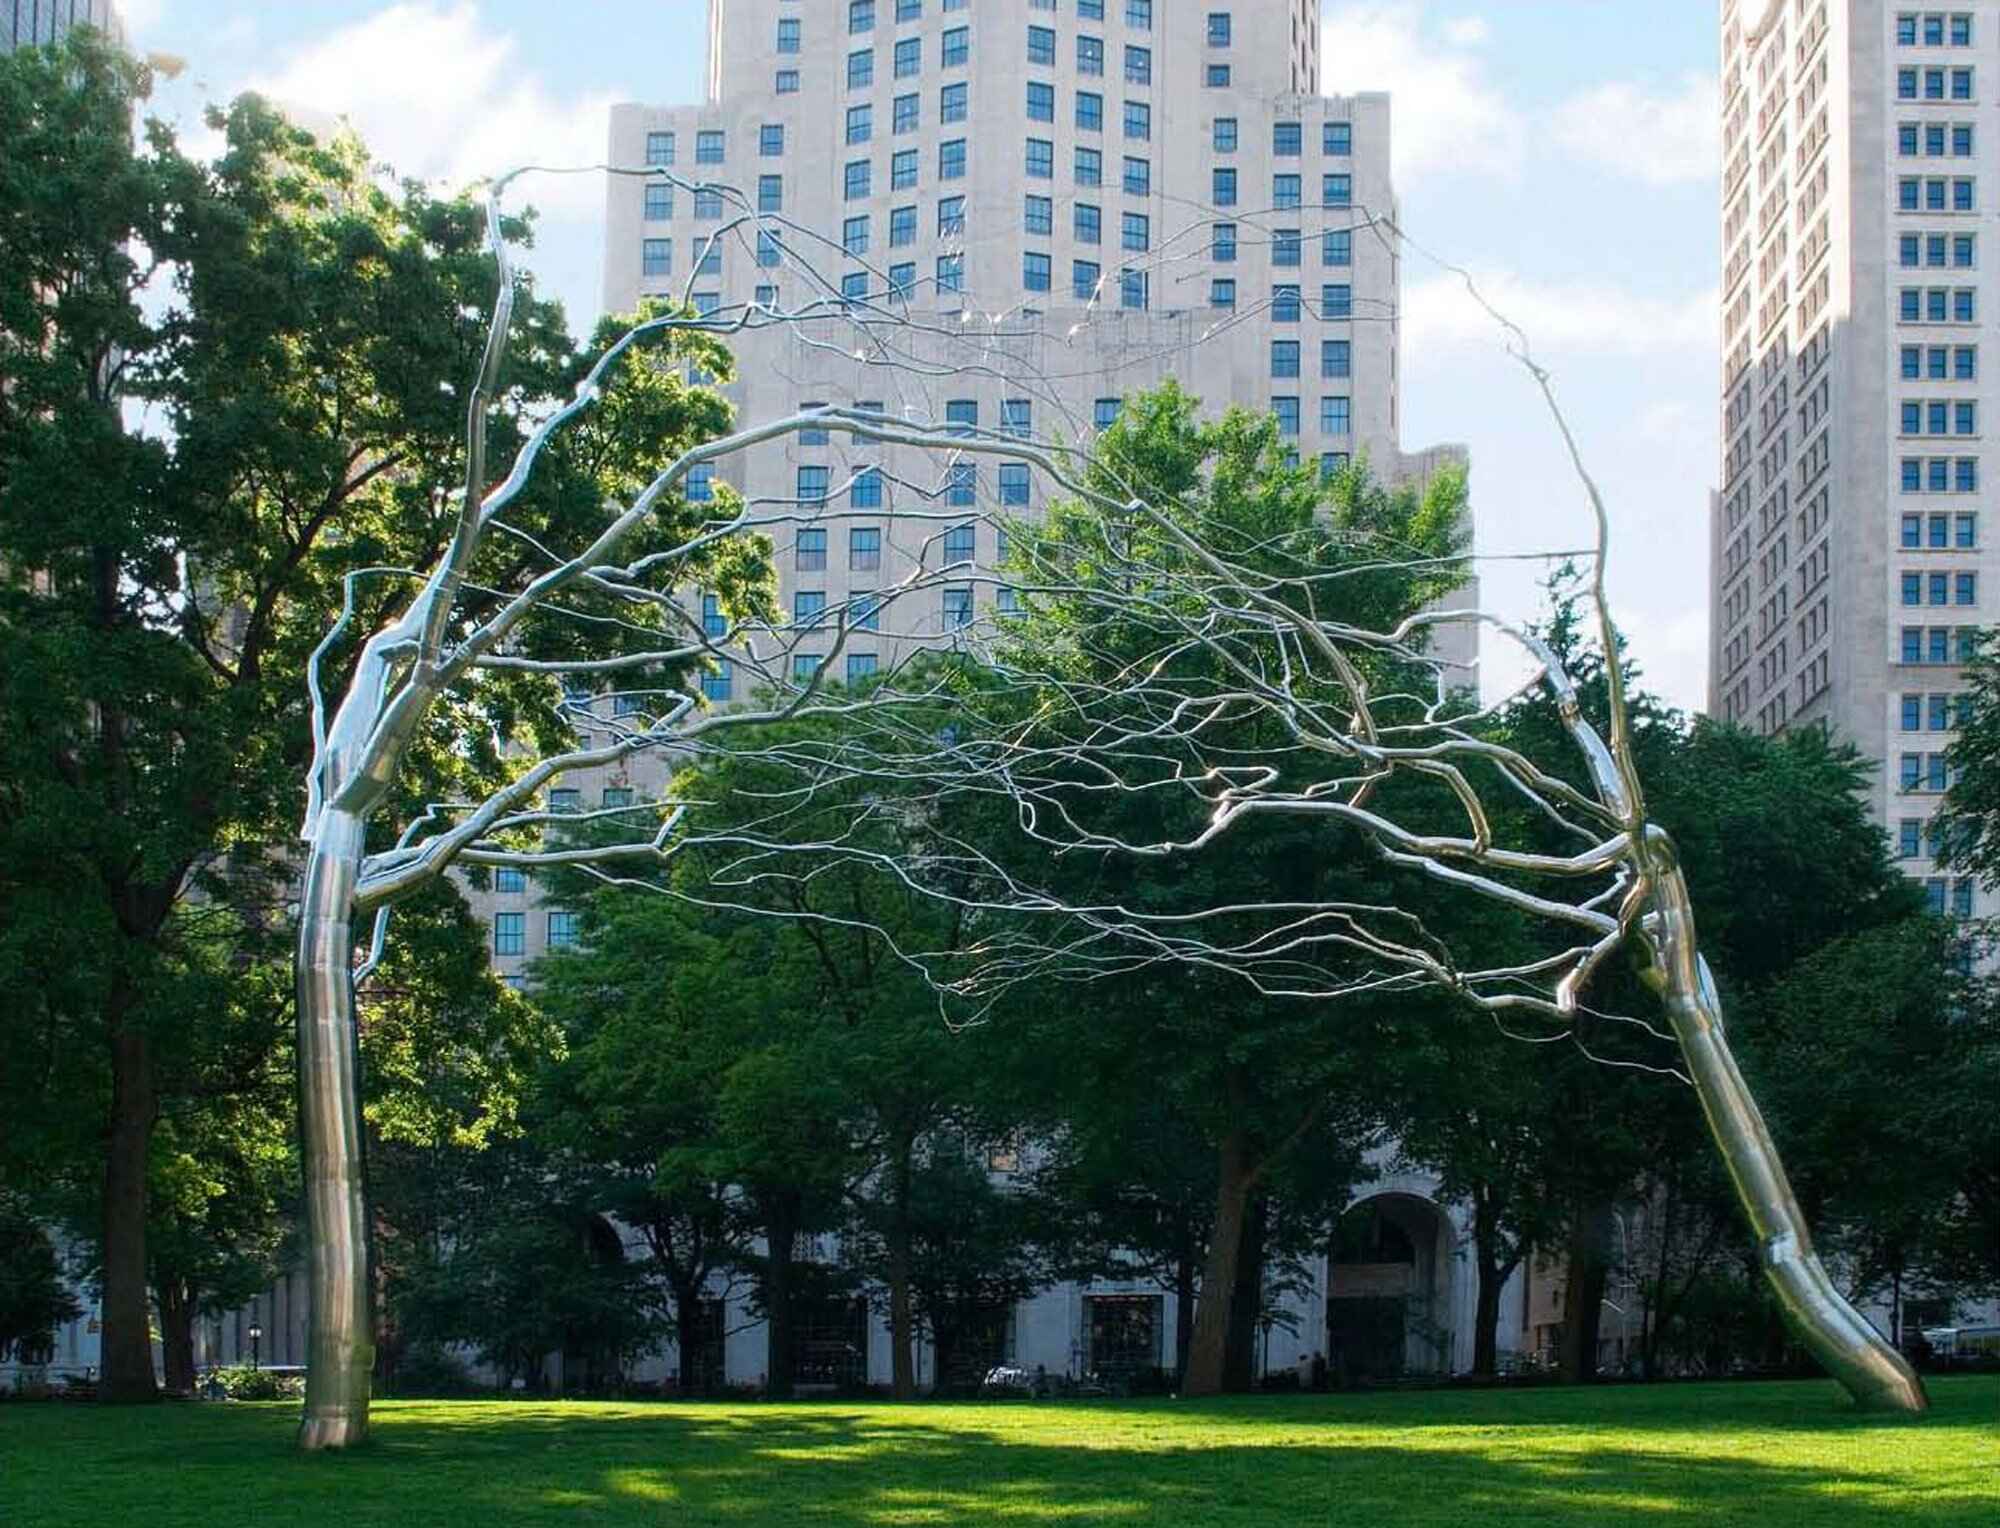 Why Is Roxy Paine’s Steel Sculpture Conjoined Particularly Inventive?